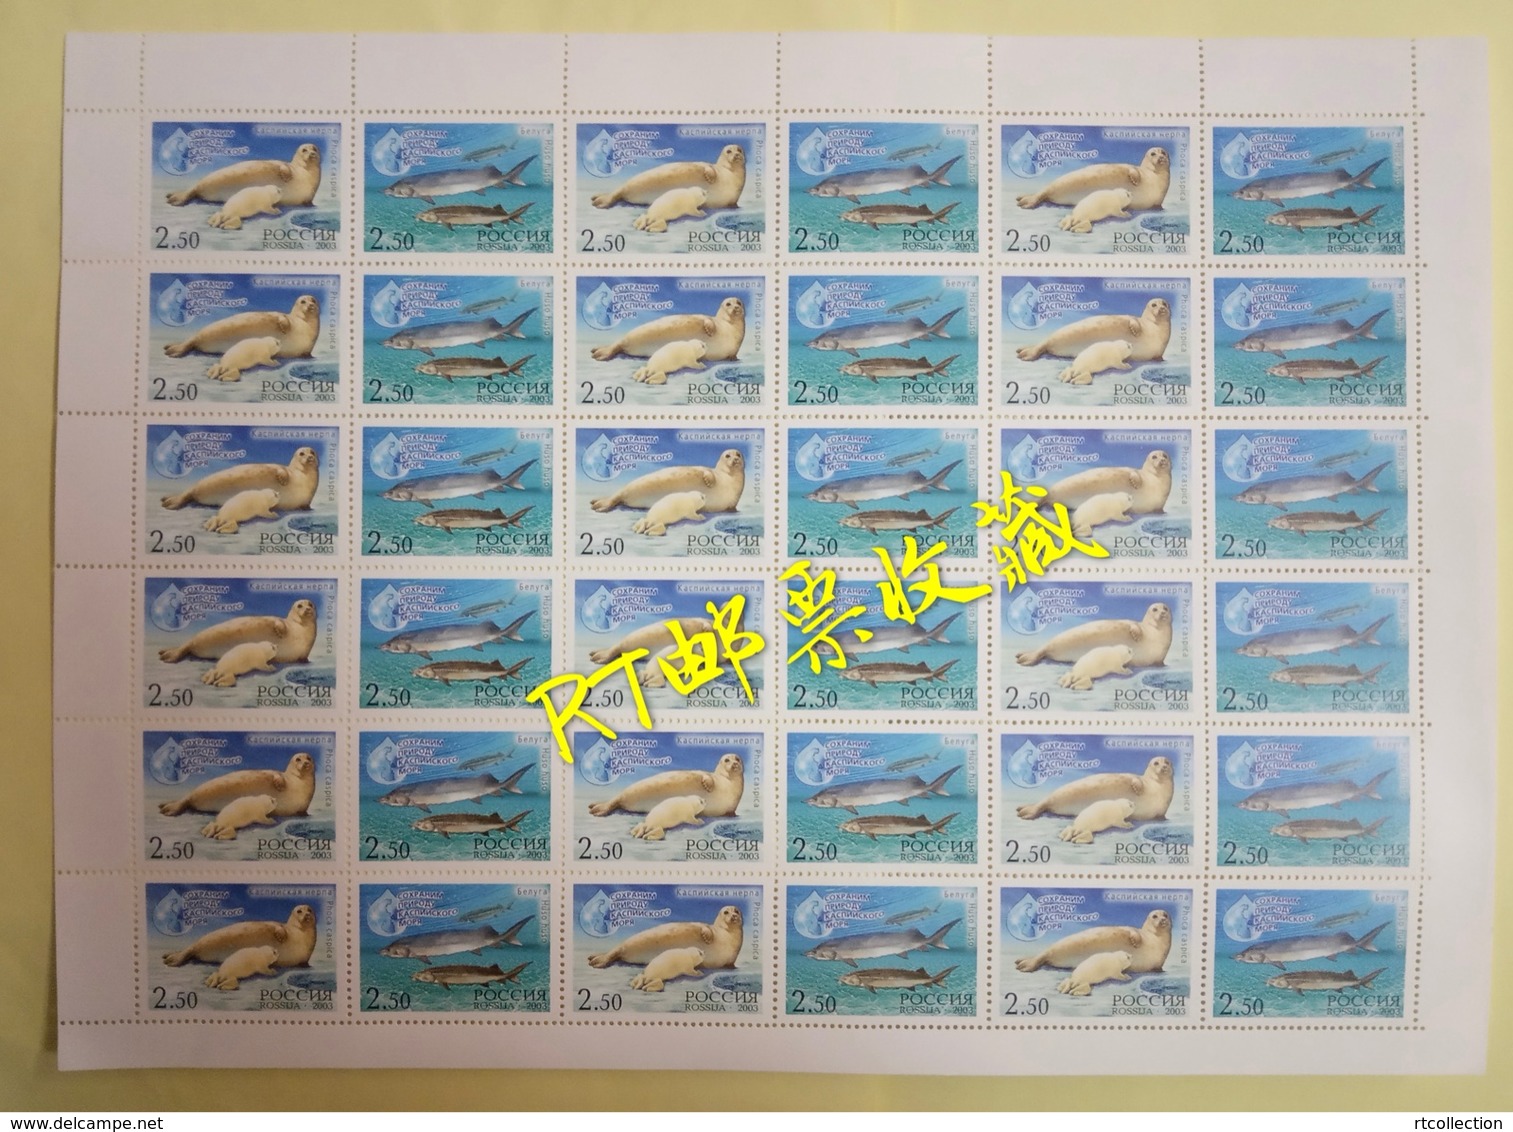 Russia 2003 Sheet Joint Issue Caspian Sea Marine Life Fauna Beluga Fish Seal Dog Animals Nature Stamps MNH Mi 1118-1119 - Feuilles Complètes